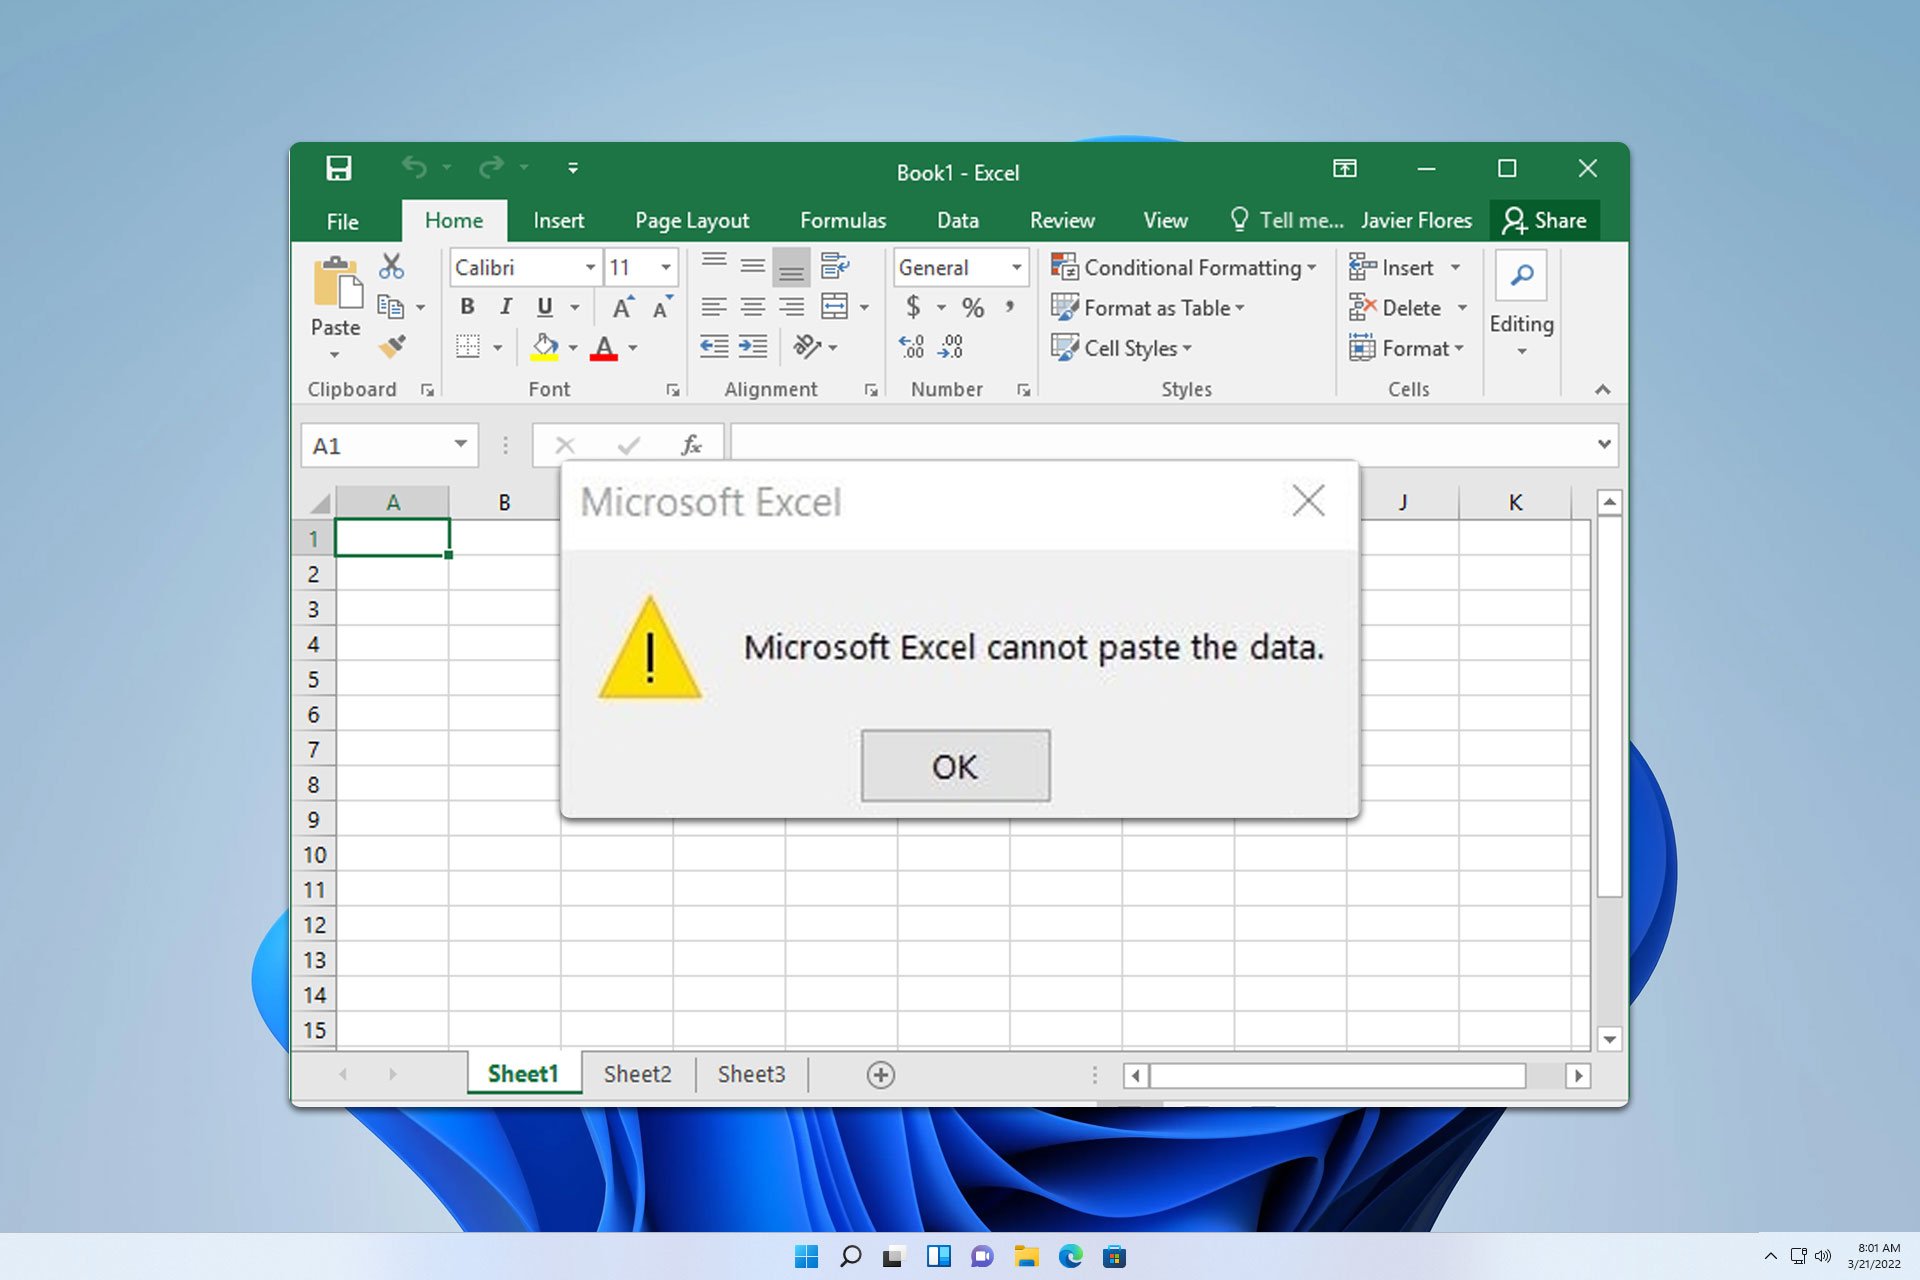 Microsoft Excel Cannot Paste The Data: 3 Ways to Enable it